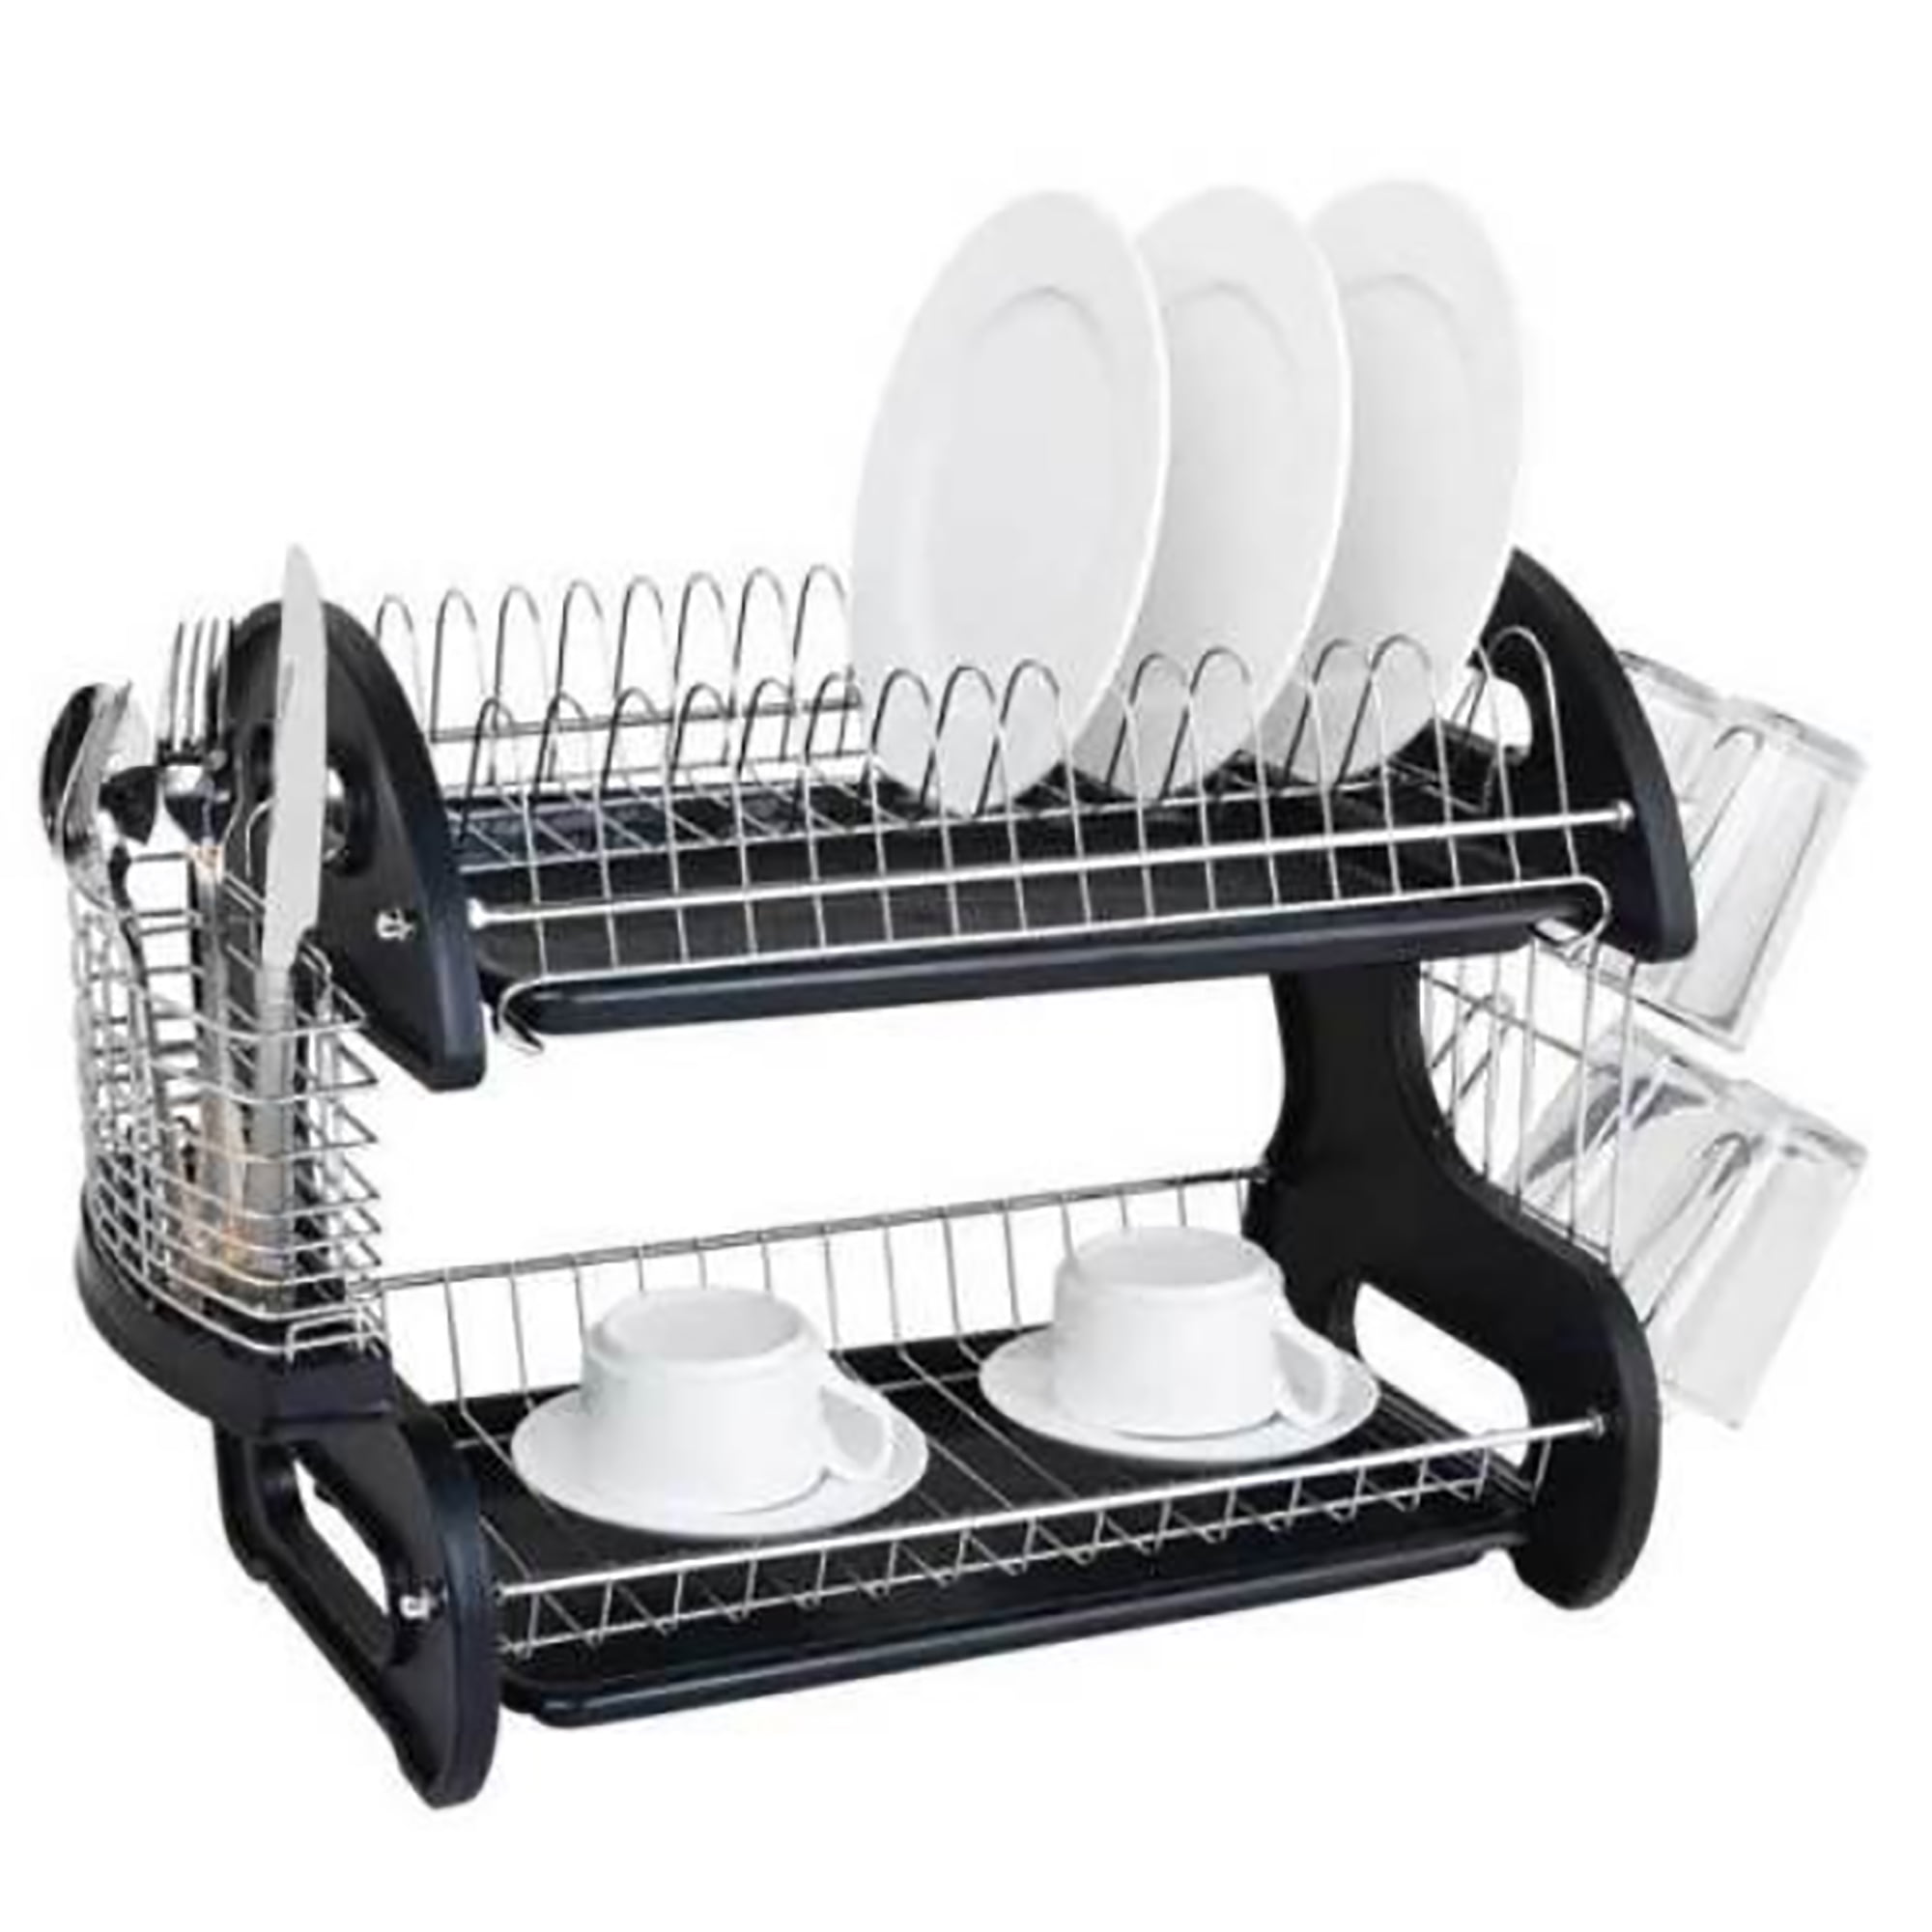 Topcobe Dish Drying Rack, 2 Tier Dish Drainer Drying Rack for Kitchen Two Tier Stainless Steel Dish Rack